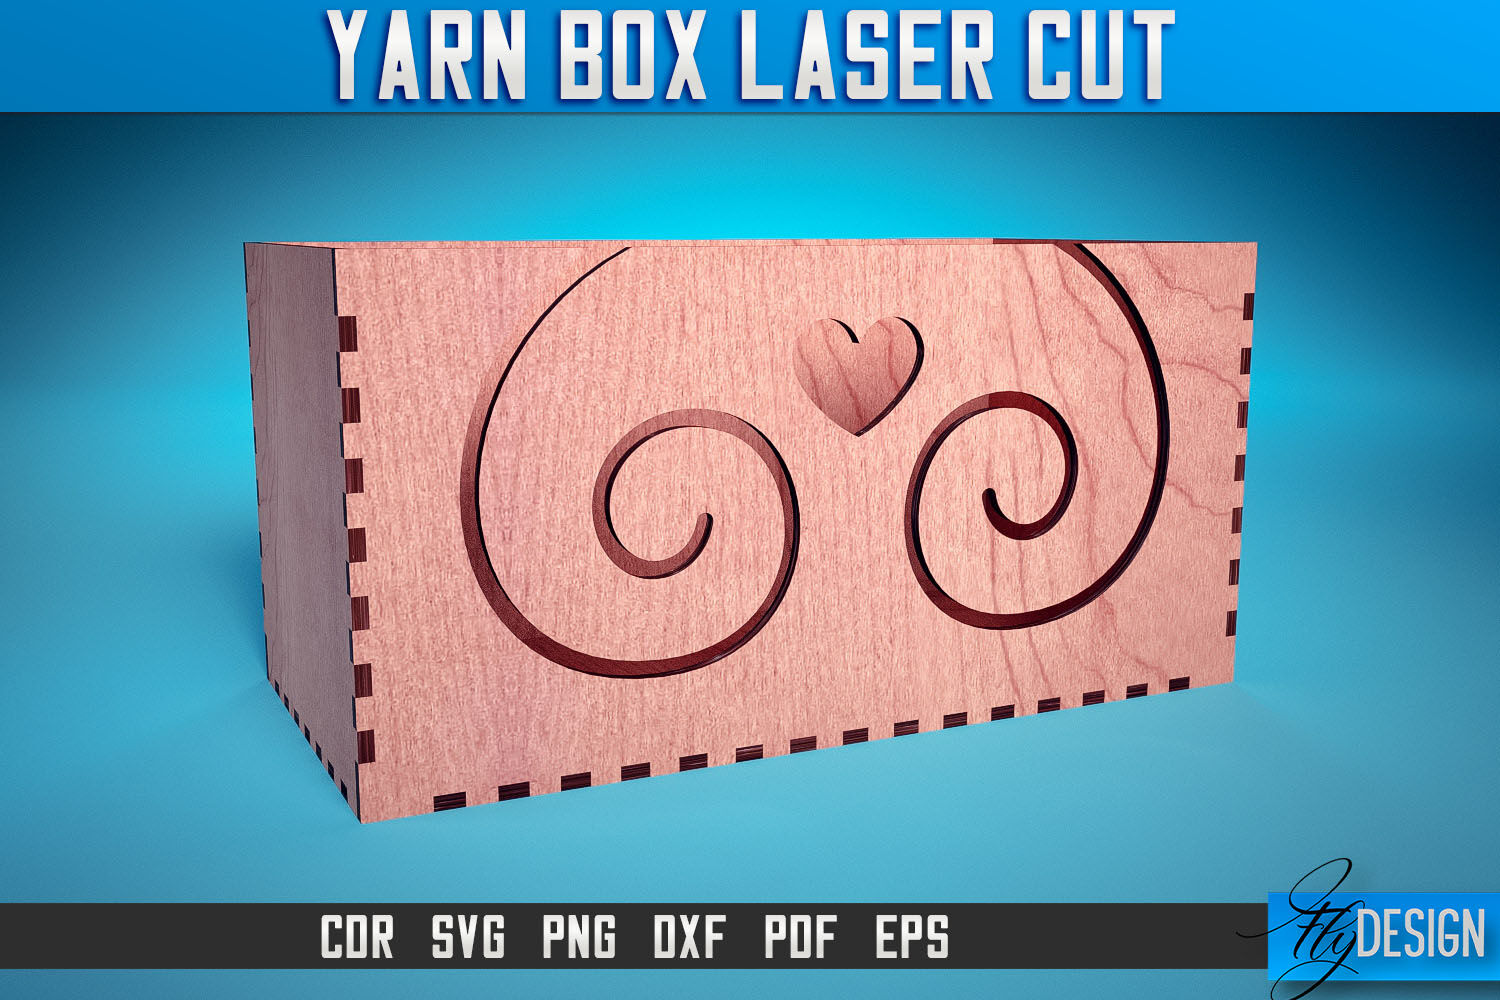 Yarn Box Laser Cut SVG  Yarn Box Laser Graphic by The T Store